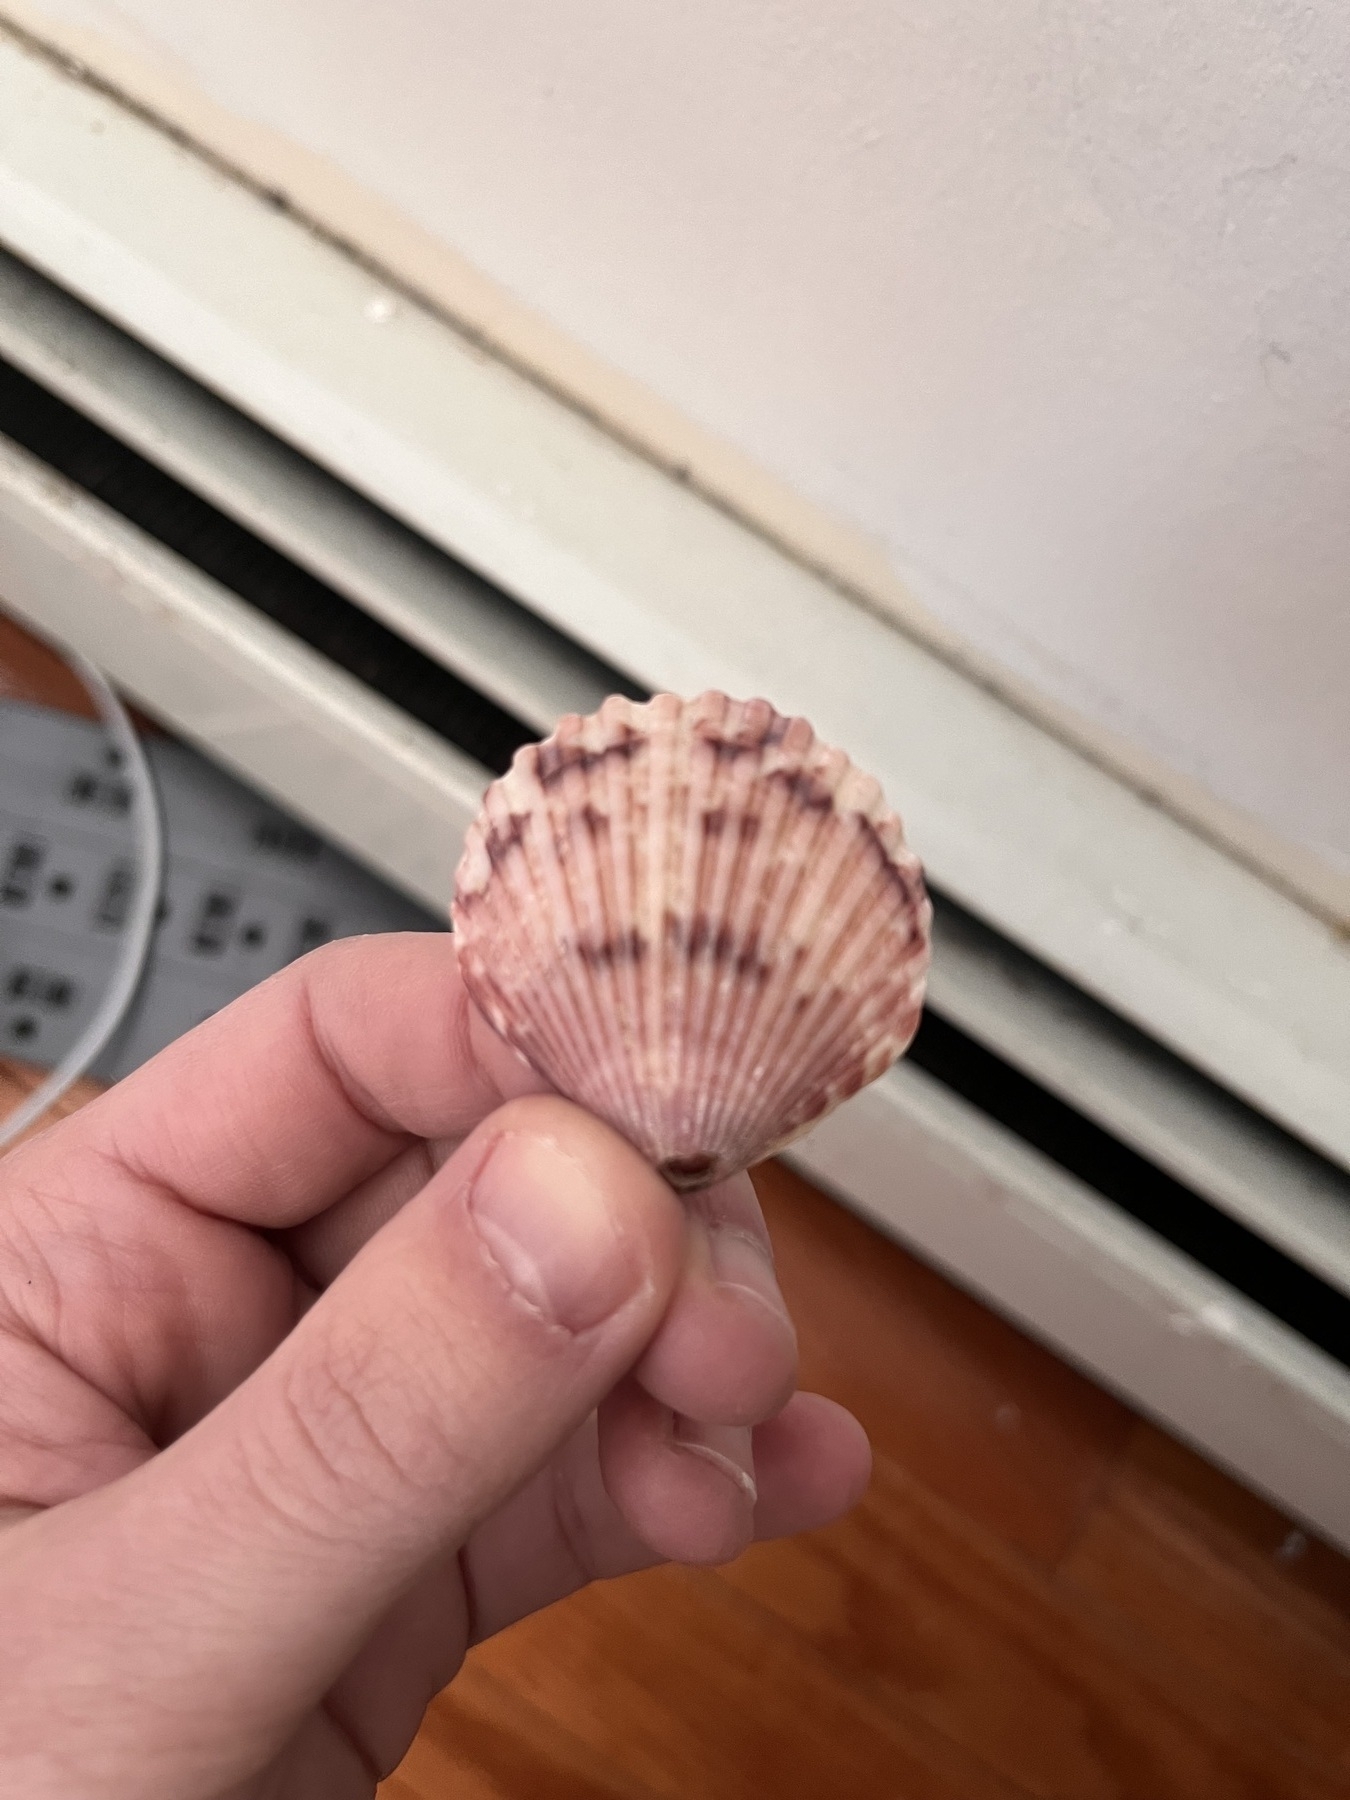 My white hand holding a classically scalloped seashell with dark red coloring in front of a baseboard radiator. 